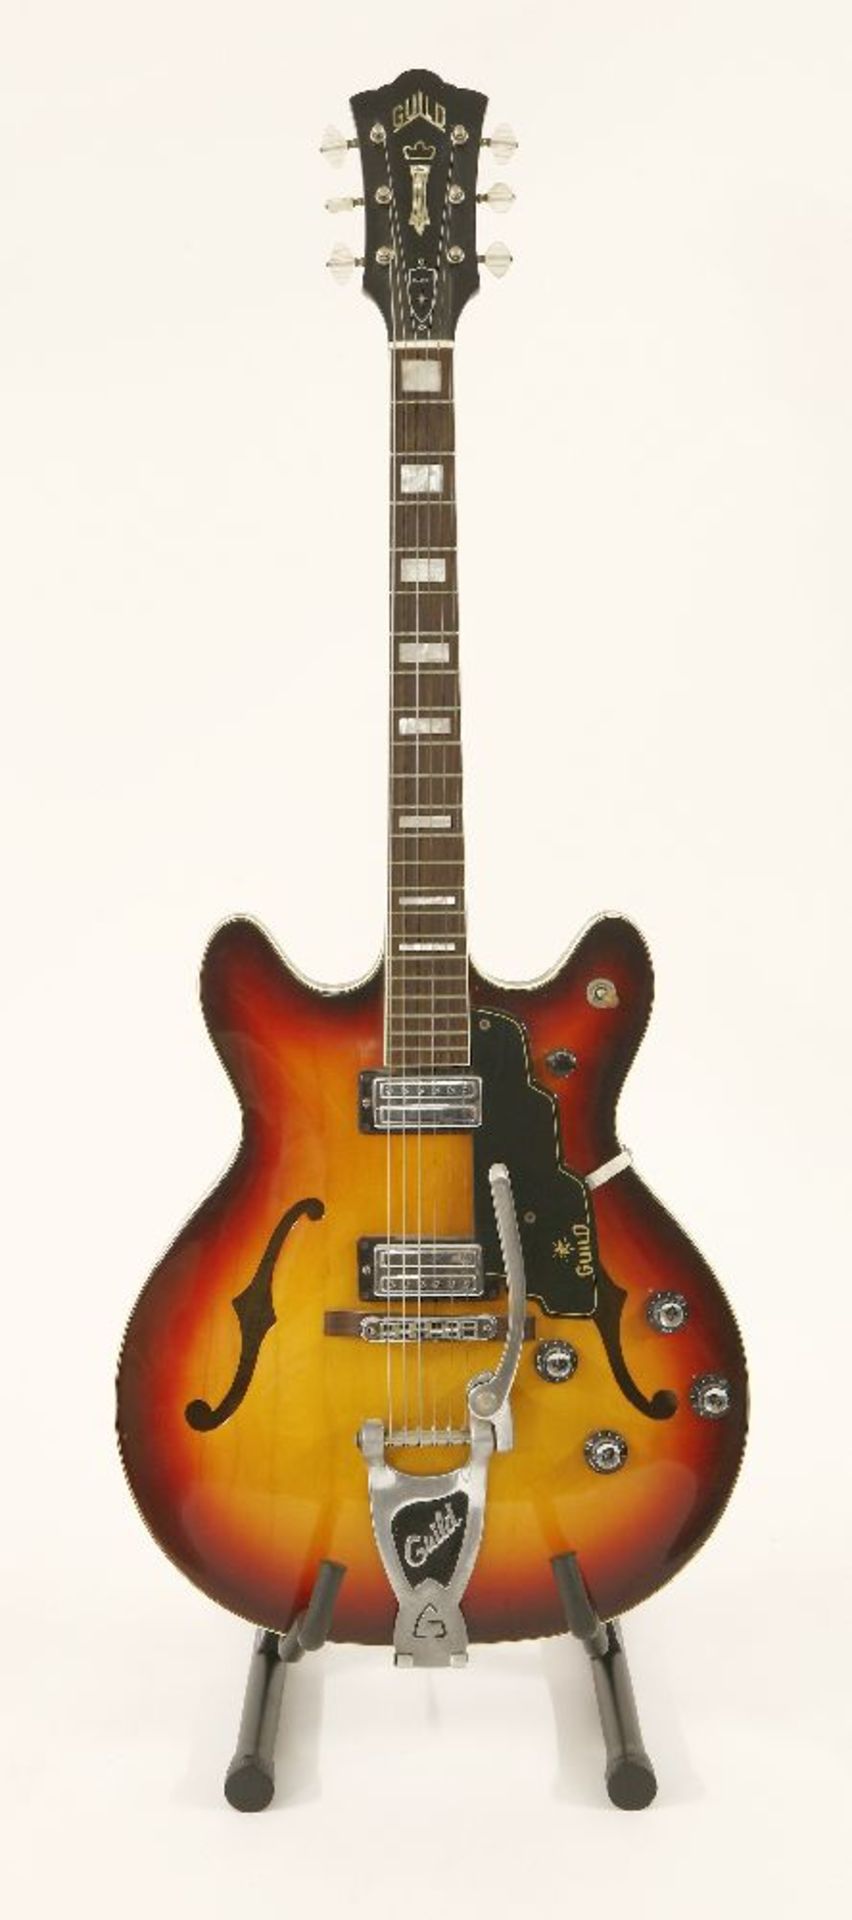 A 1965 Guild Starfire V semi-electric guitar, §serial number 4***5, in cherry sunburst finish and